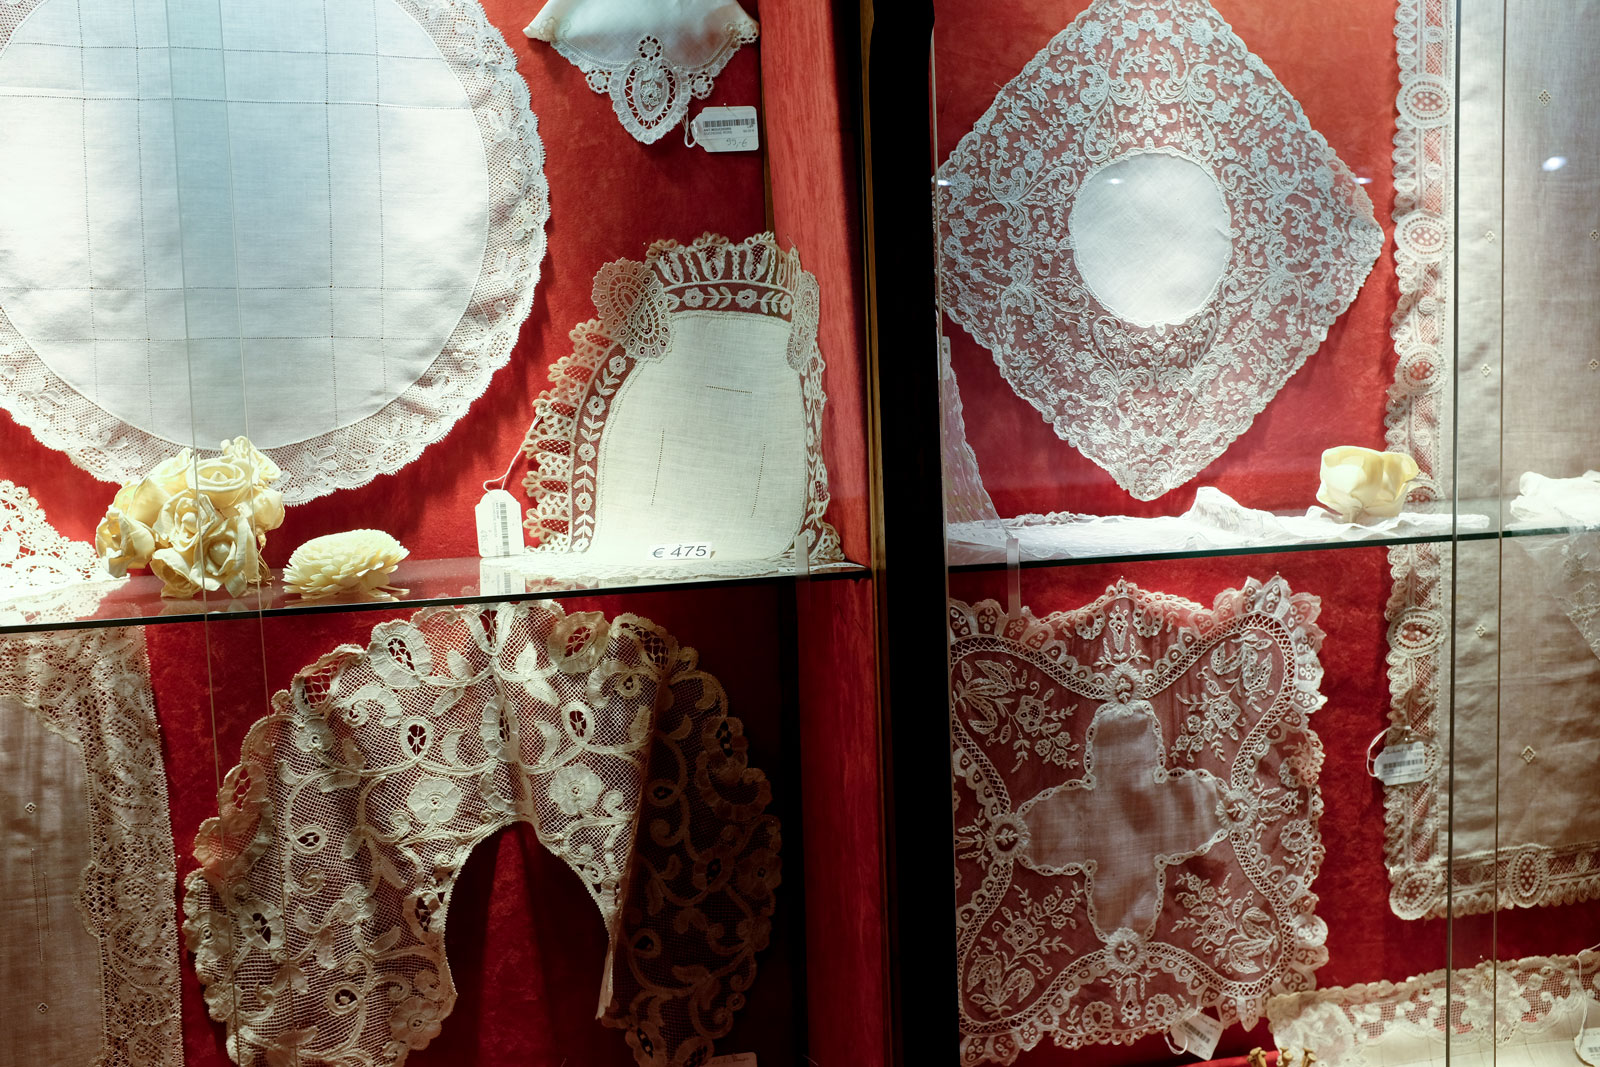 A display of lace in a window in Bruges